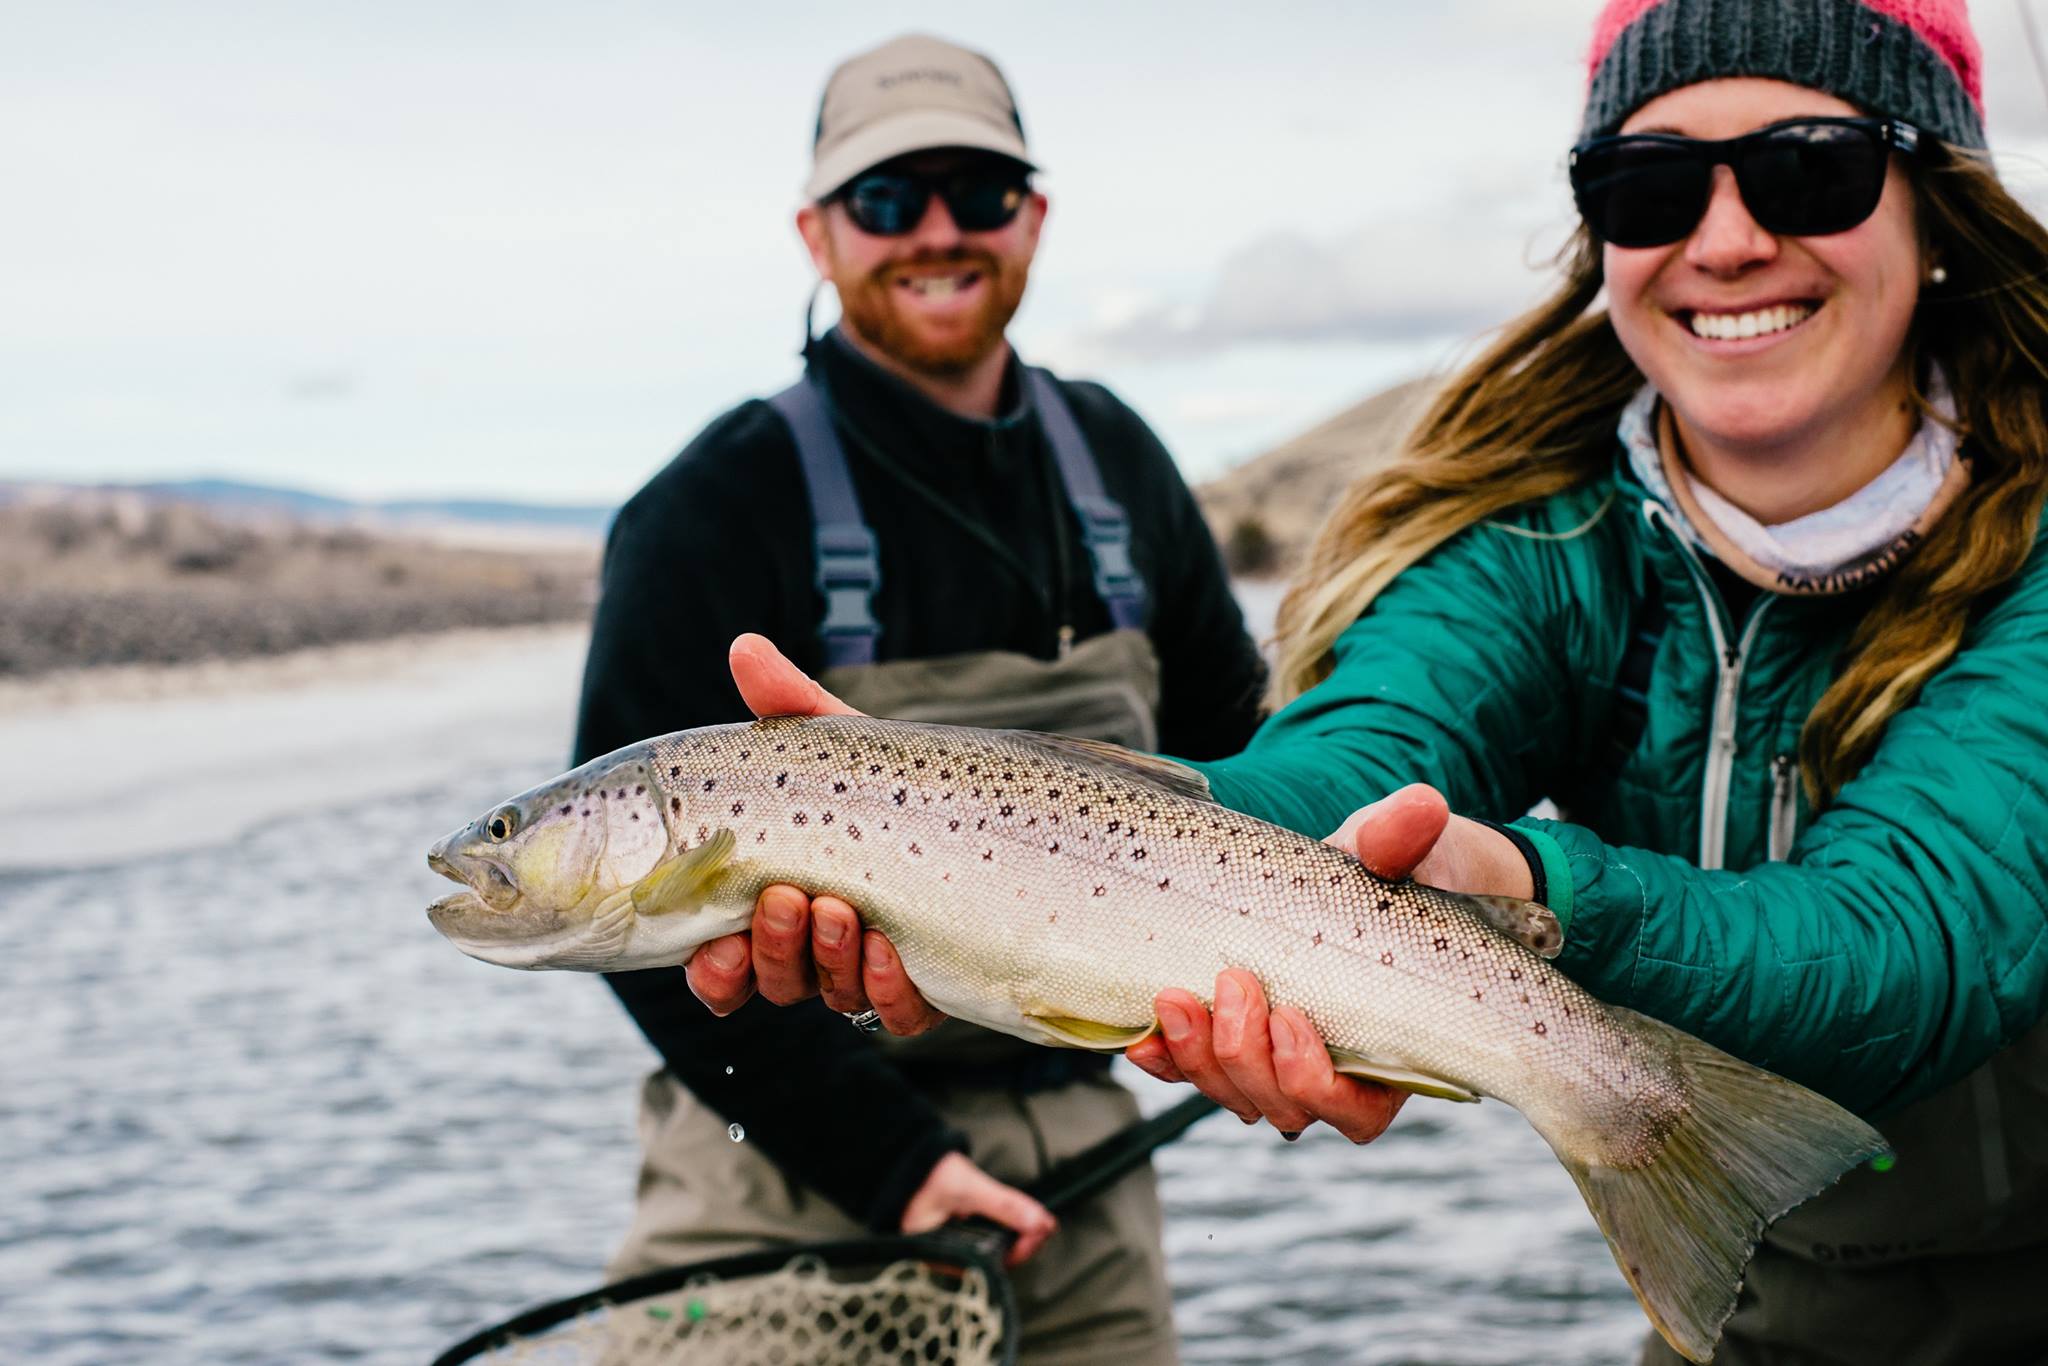 Guided fly fishing trip - Montana Adventure Guides 